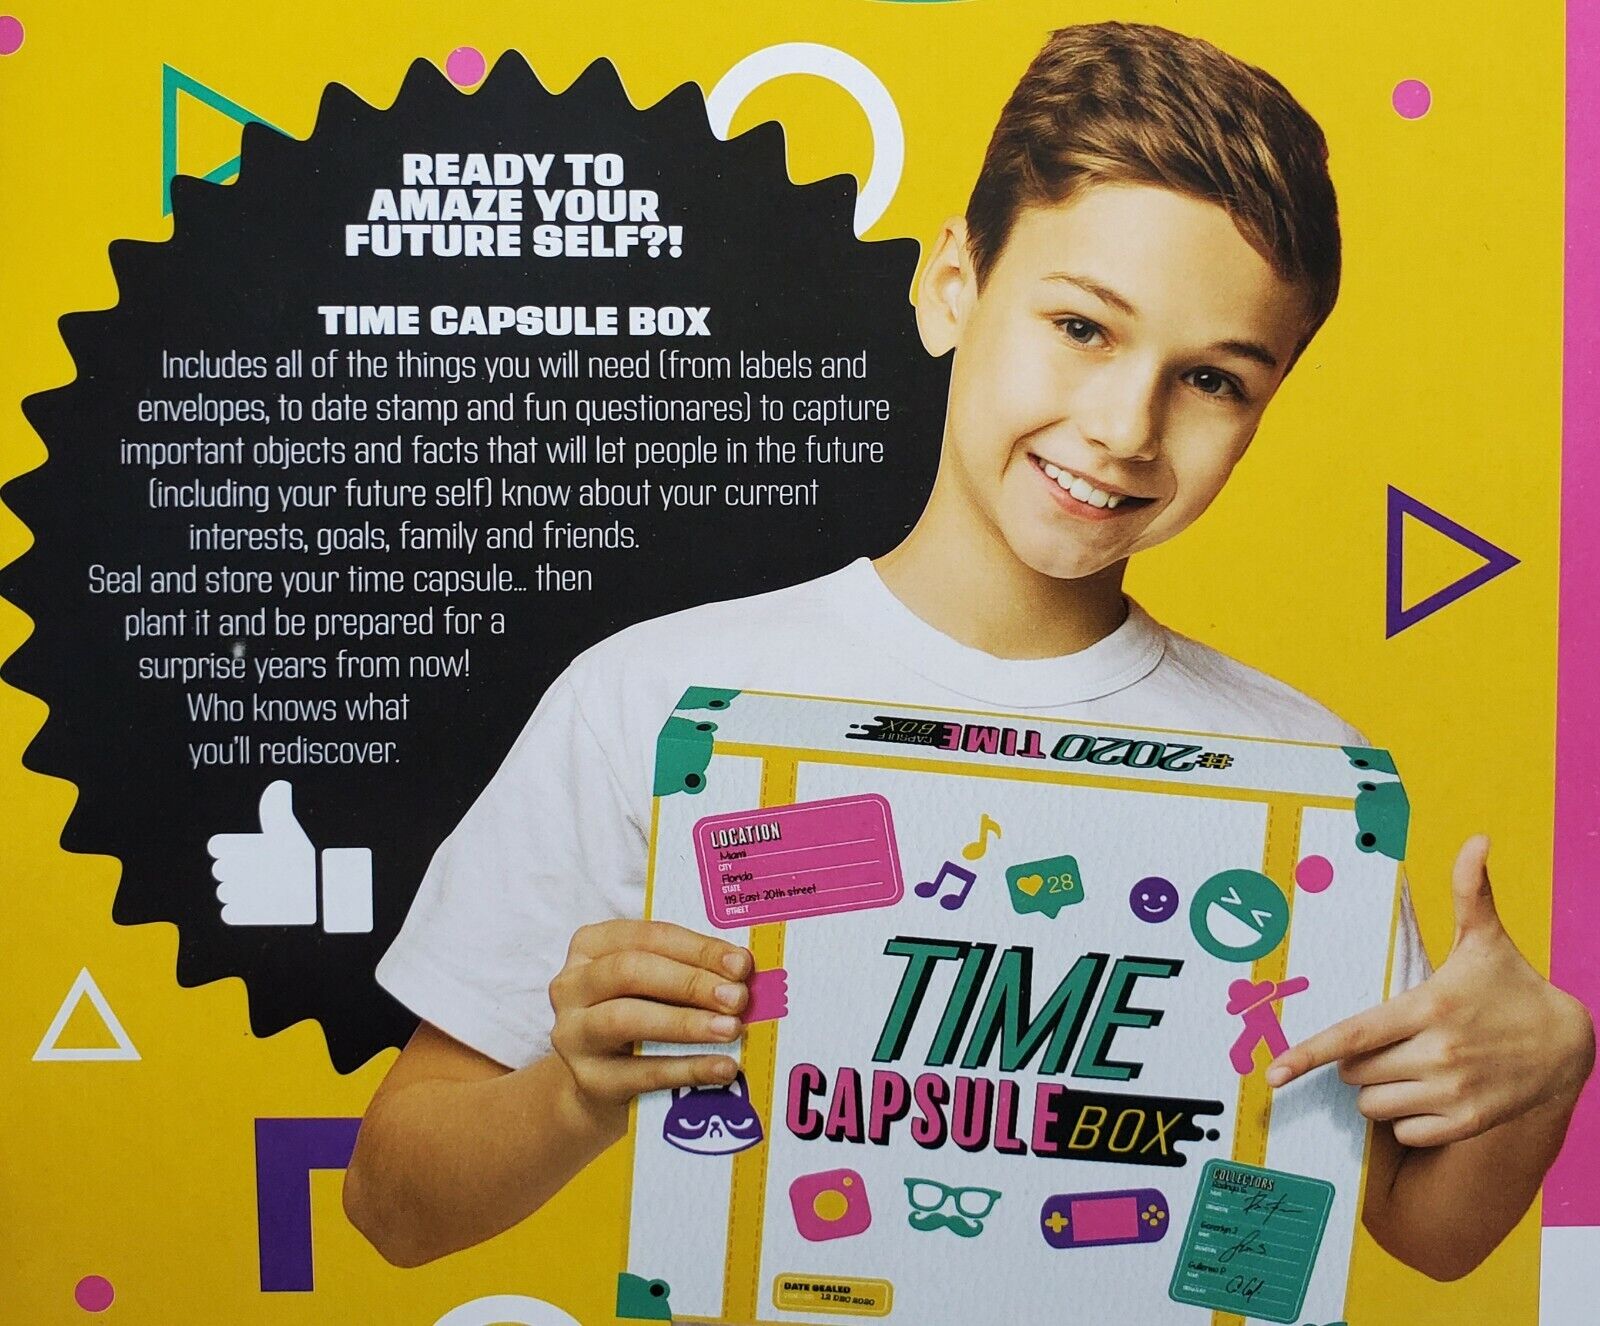 Childrens Toy TIme Capsule Box Game For Future